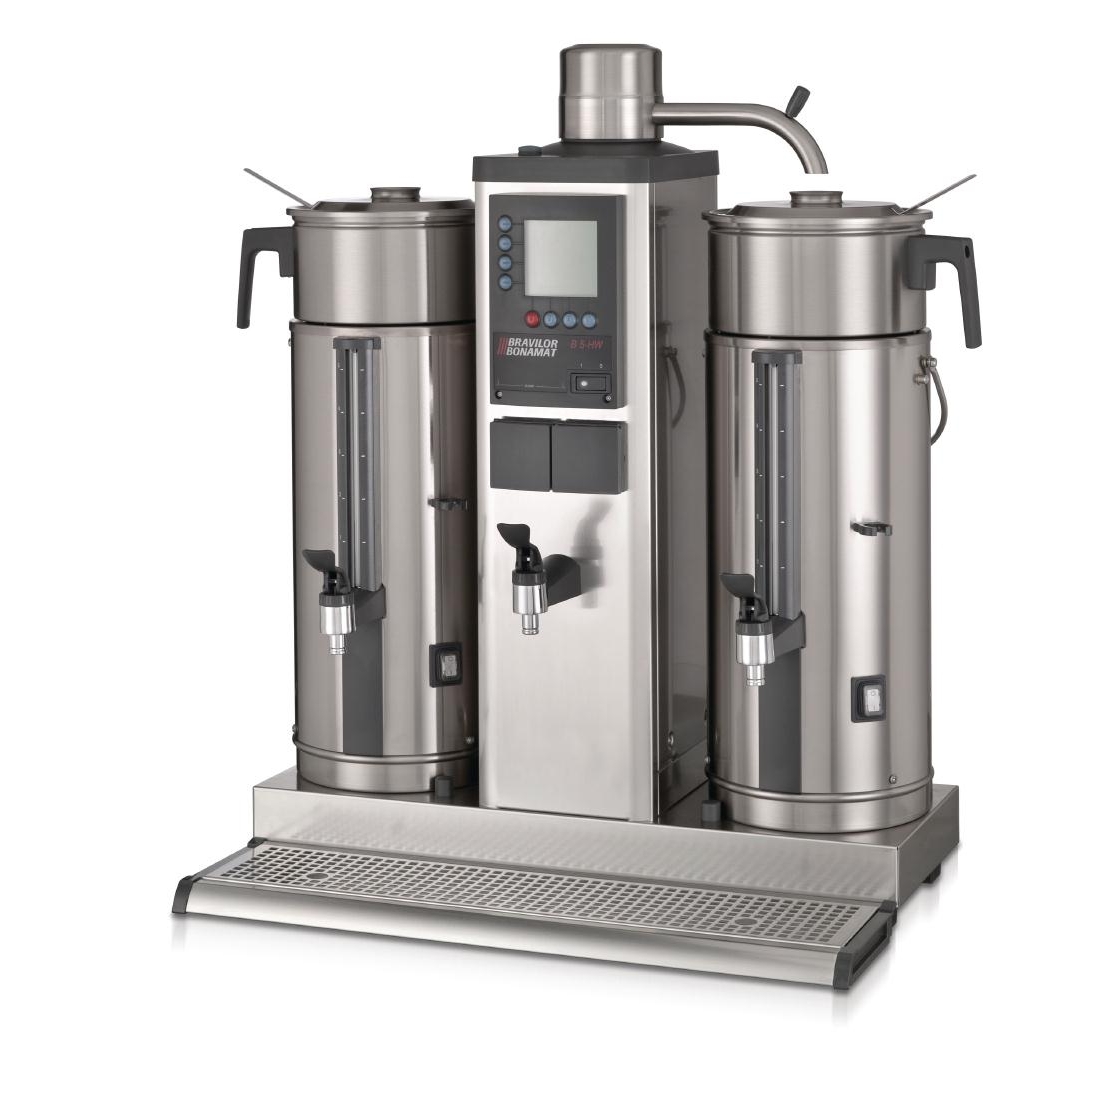 Bravilor B5 HW Bulk Coffee Brewer with 2x5Ltr Coffee Urns and Hot Water Tap Single Phase